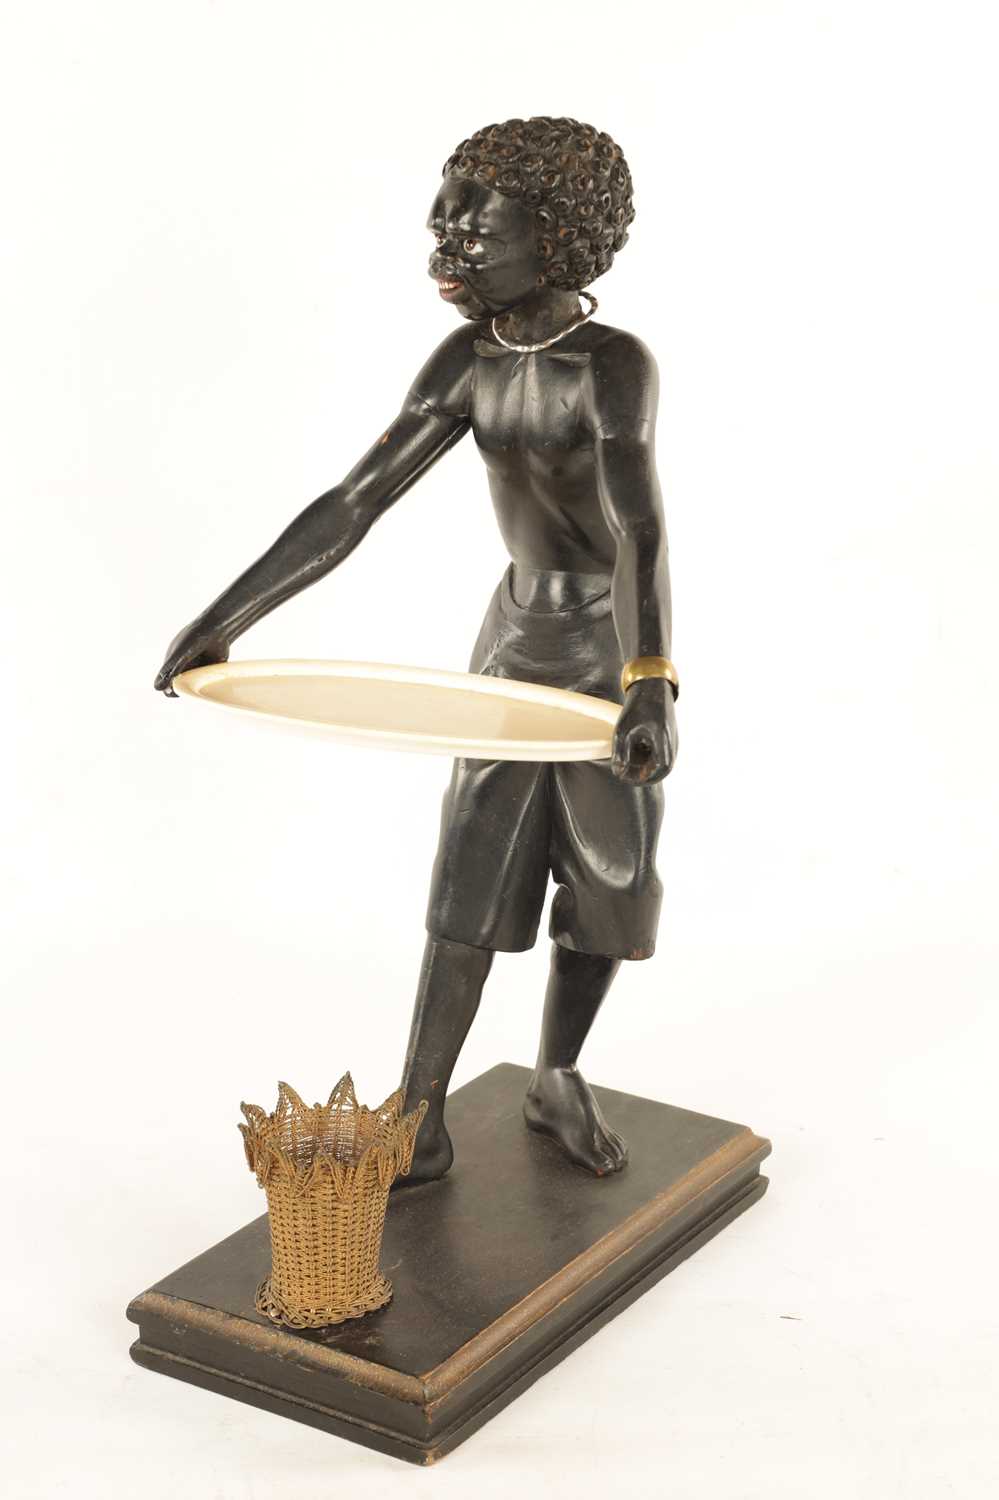 A 19TH CENTURY CARVED WOOD AND IVORY BLACKAMOOR “CARD” FIGURE - Image 2 of 13